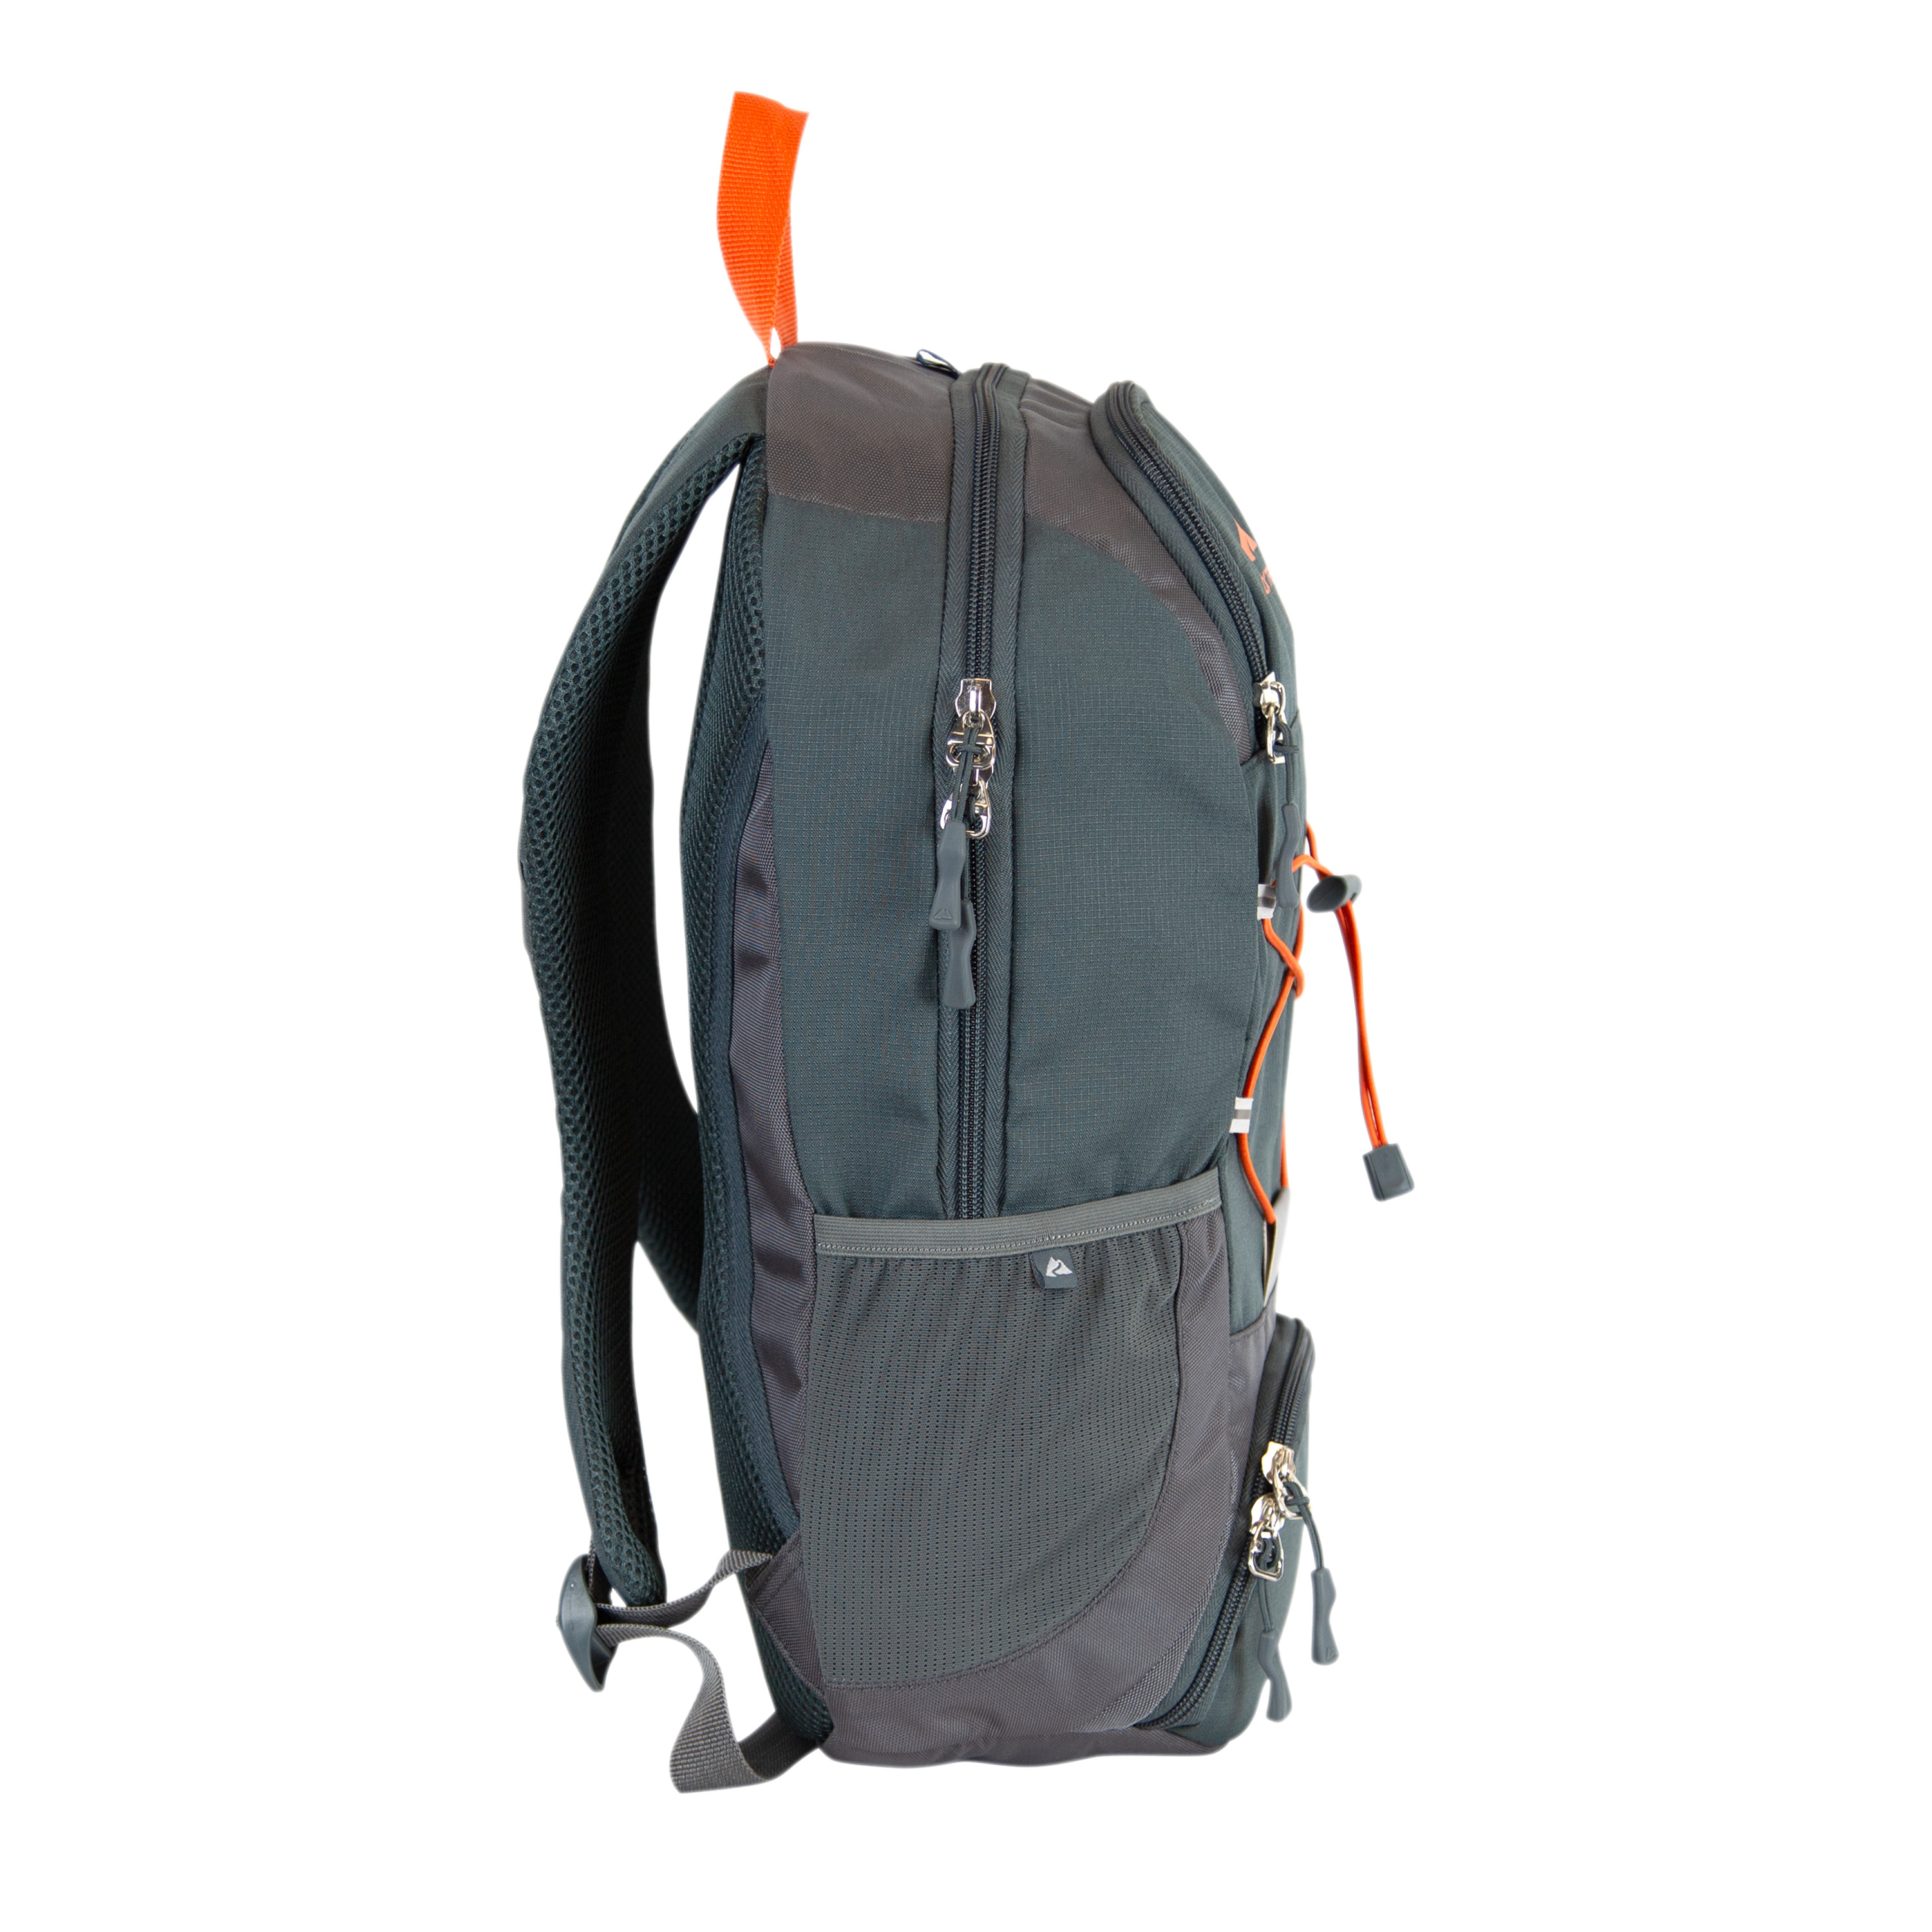 Ozark Trail 20L Thomas Hollow Backpack with Insulated Cooler Pocket, Gray, Solid Pattern - image 3 of 9